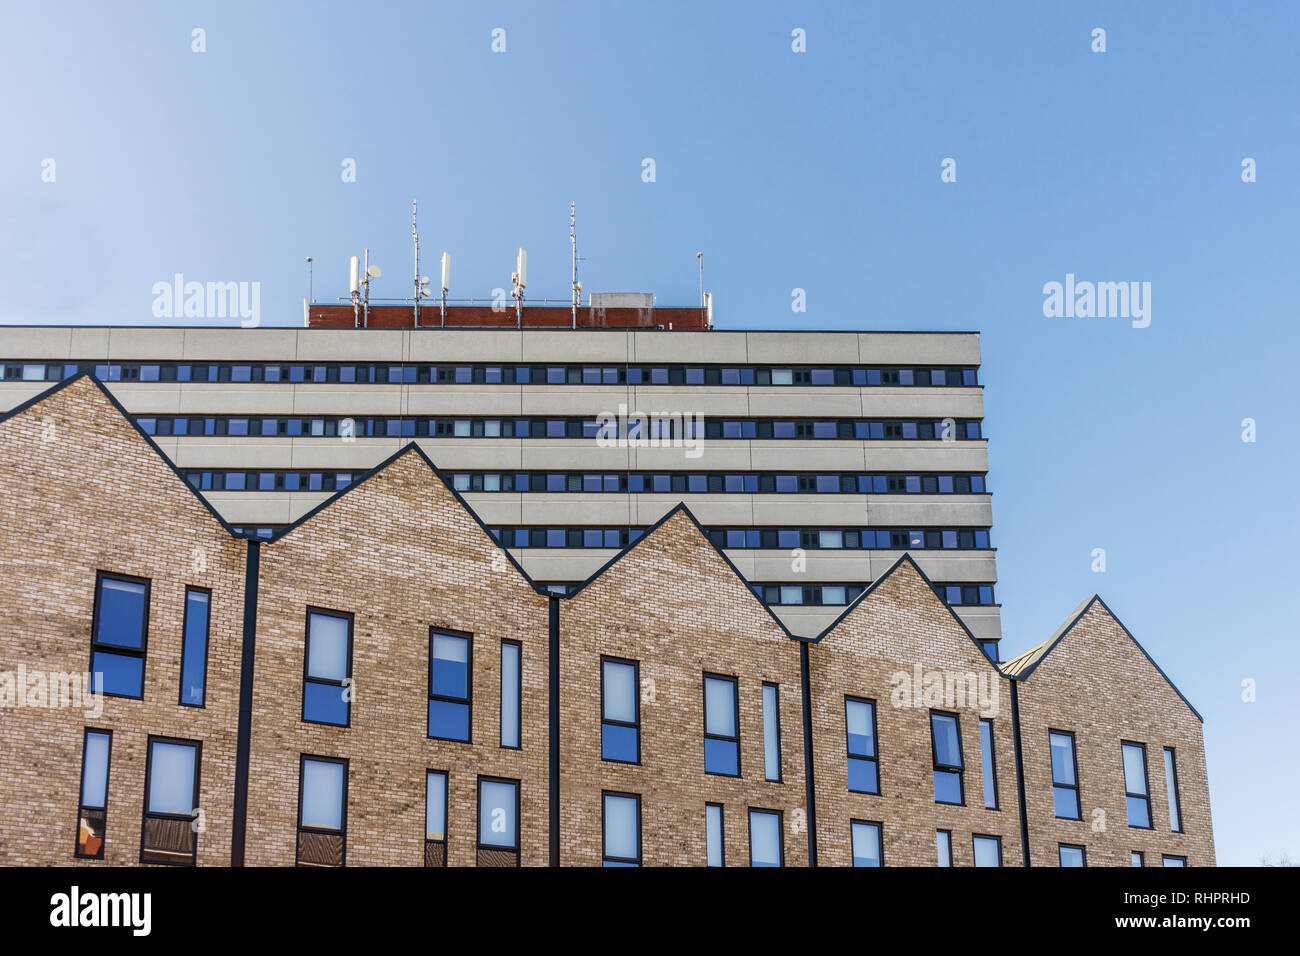 New built houses along Evans Street in Southampton in contrast with an old building in brutalist style architecture, Southampton, England, UK Stock Photo